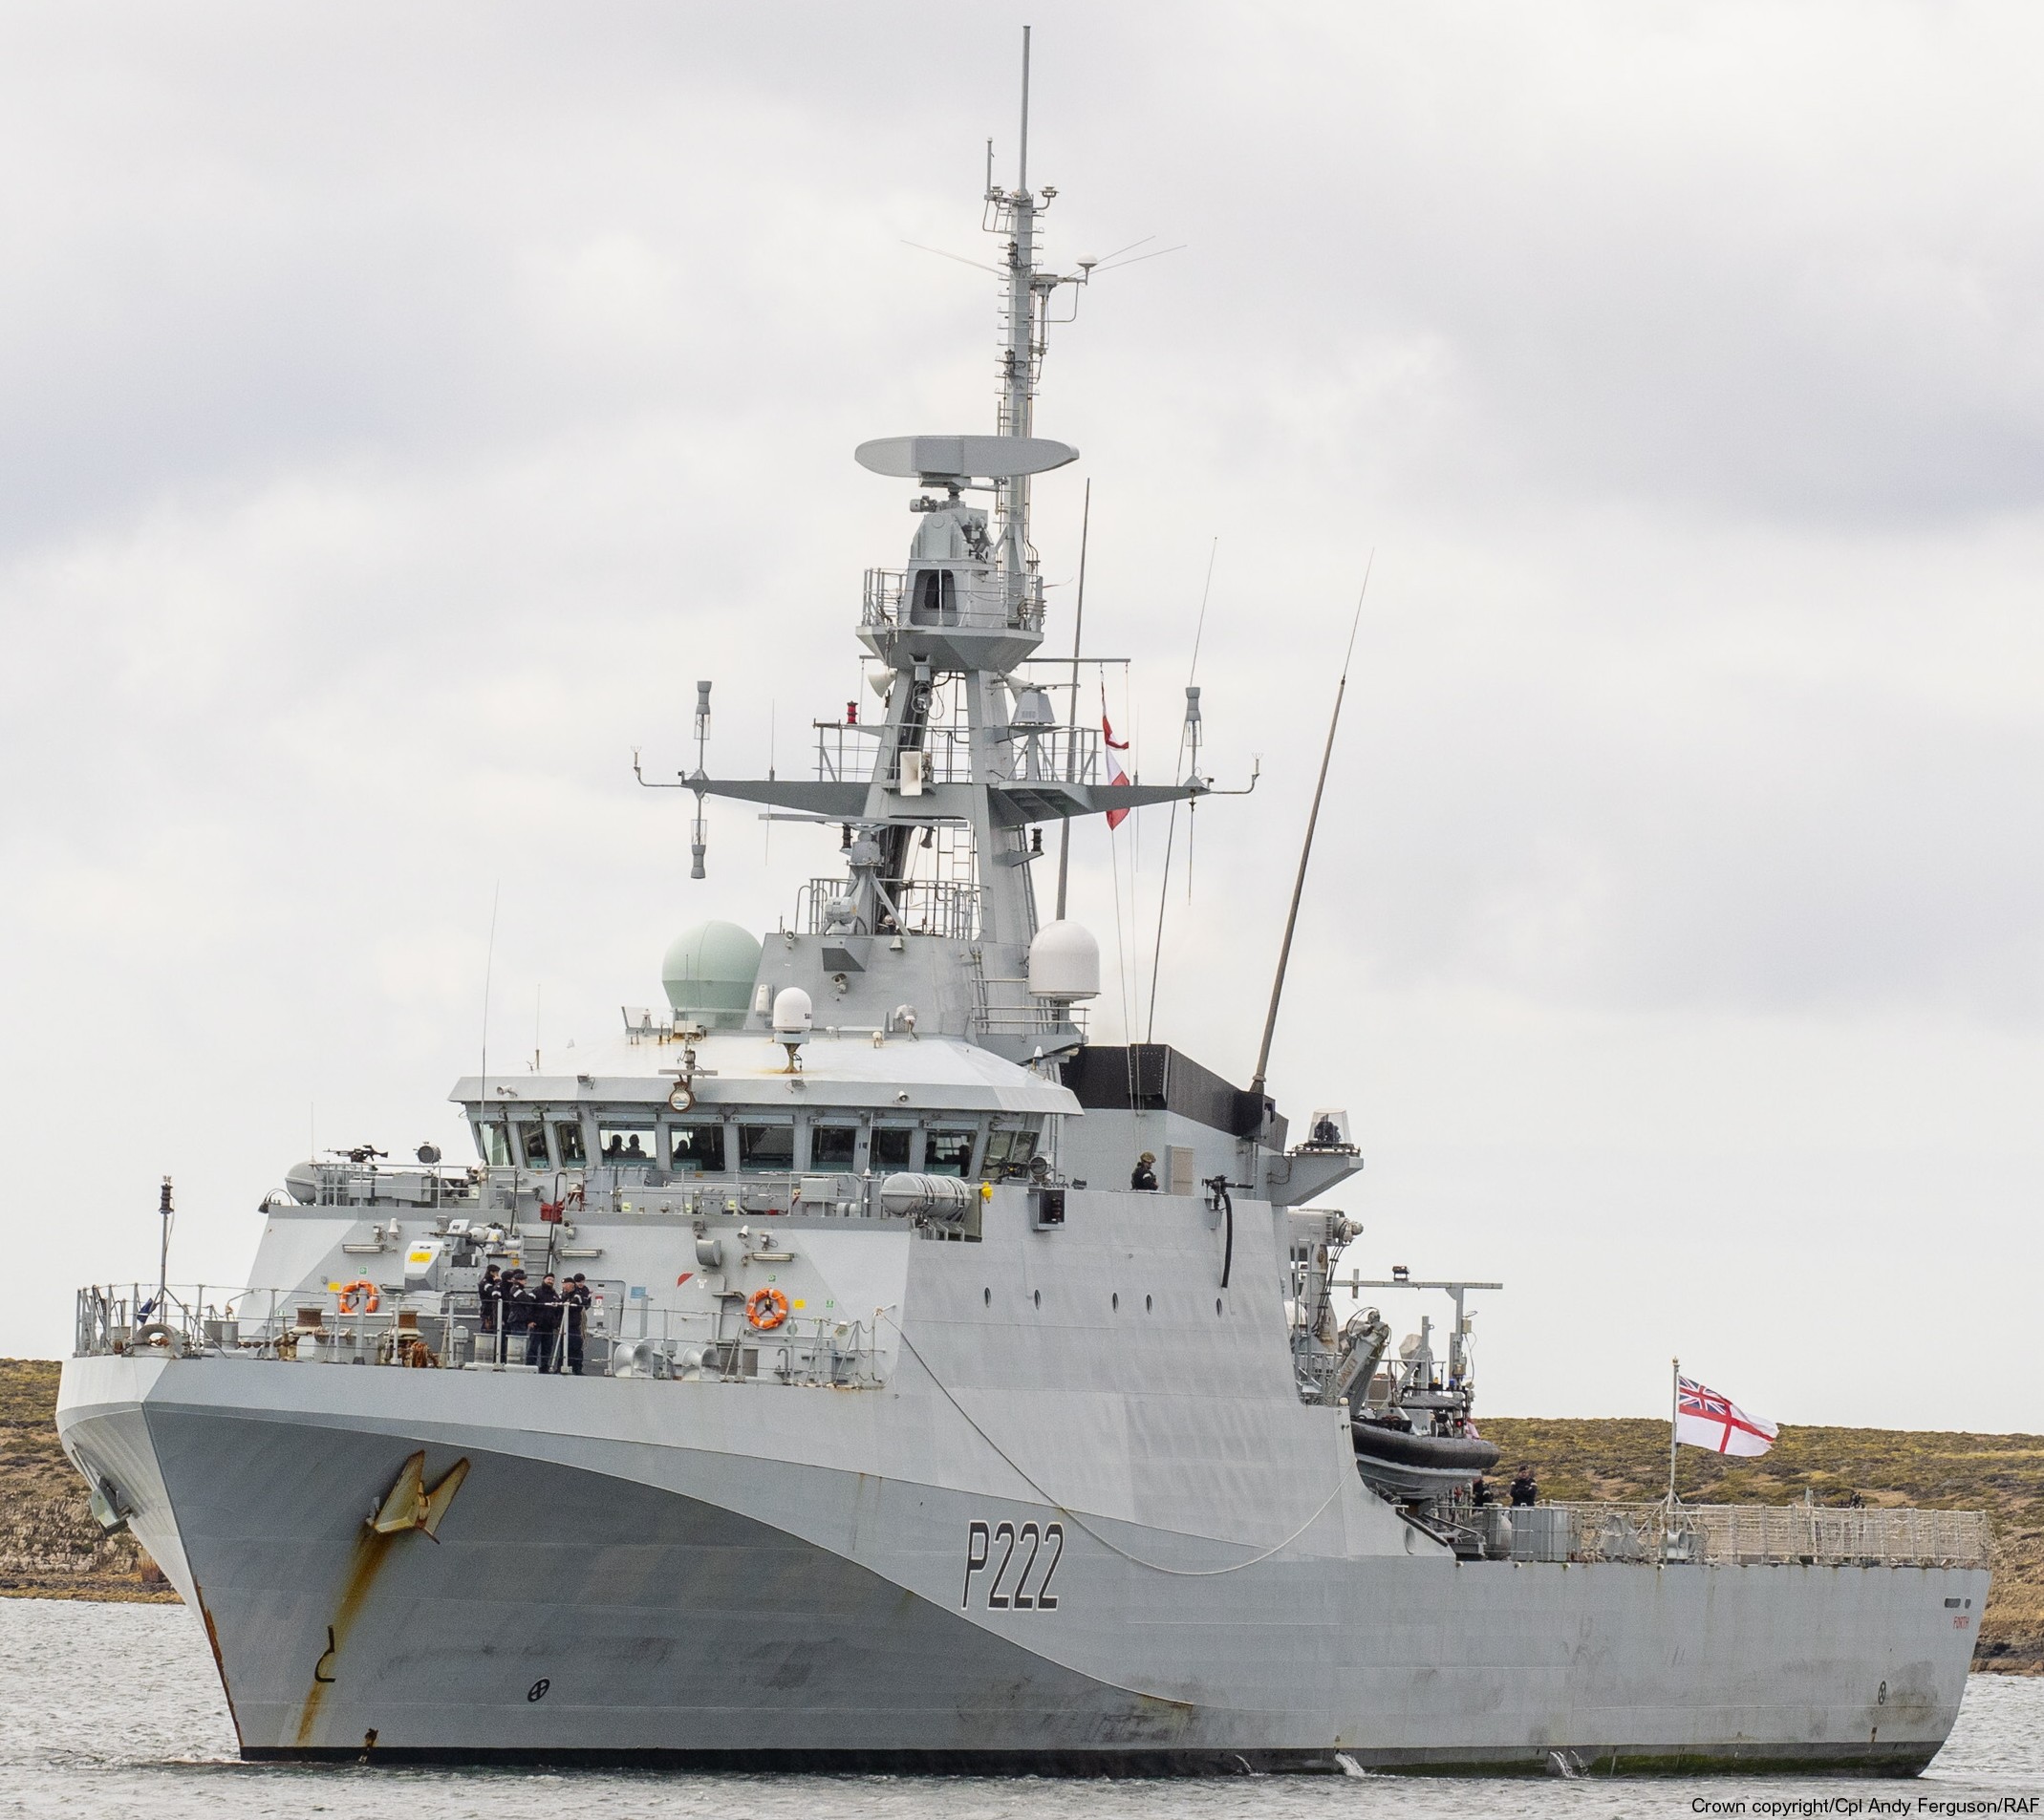 p-222 hms forth river class offshore patrol vessel opv royal navy 04